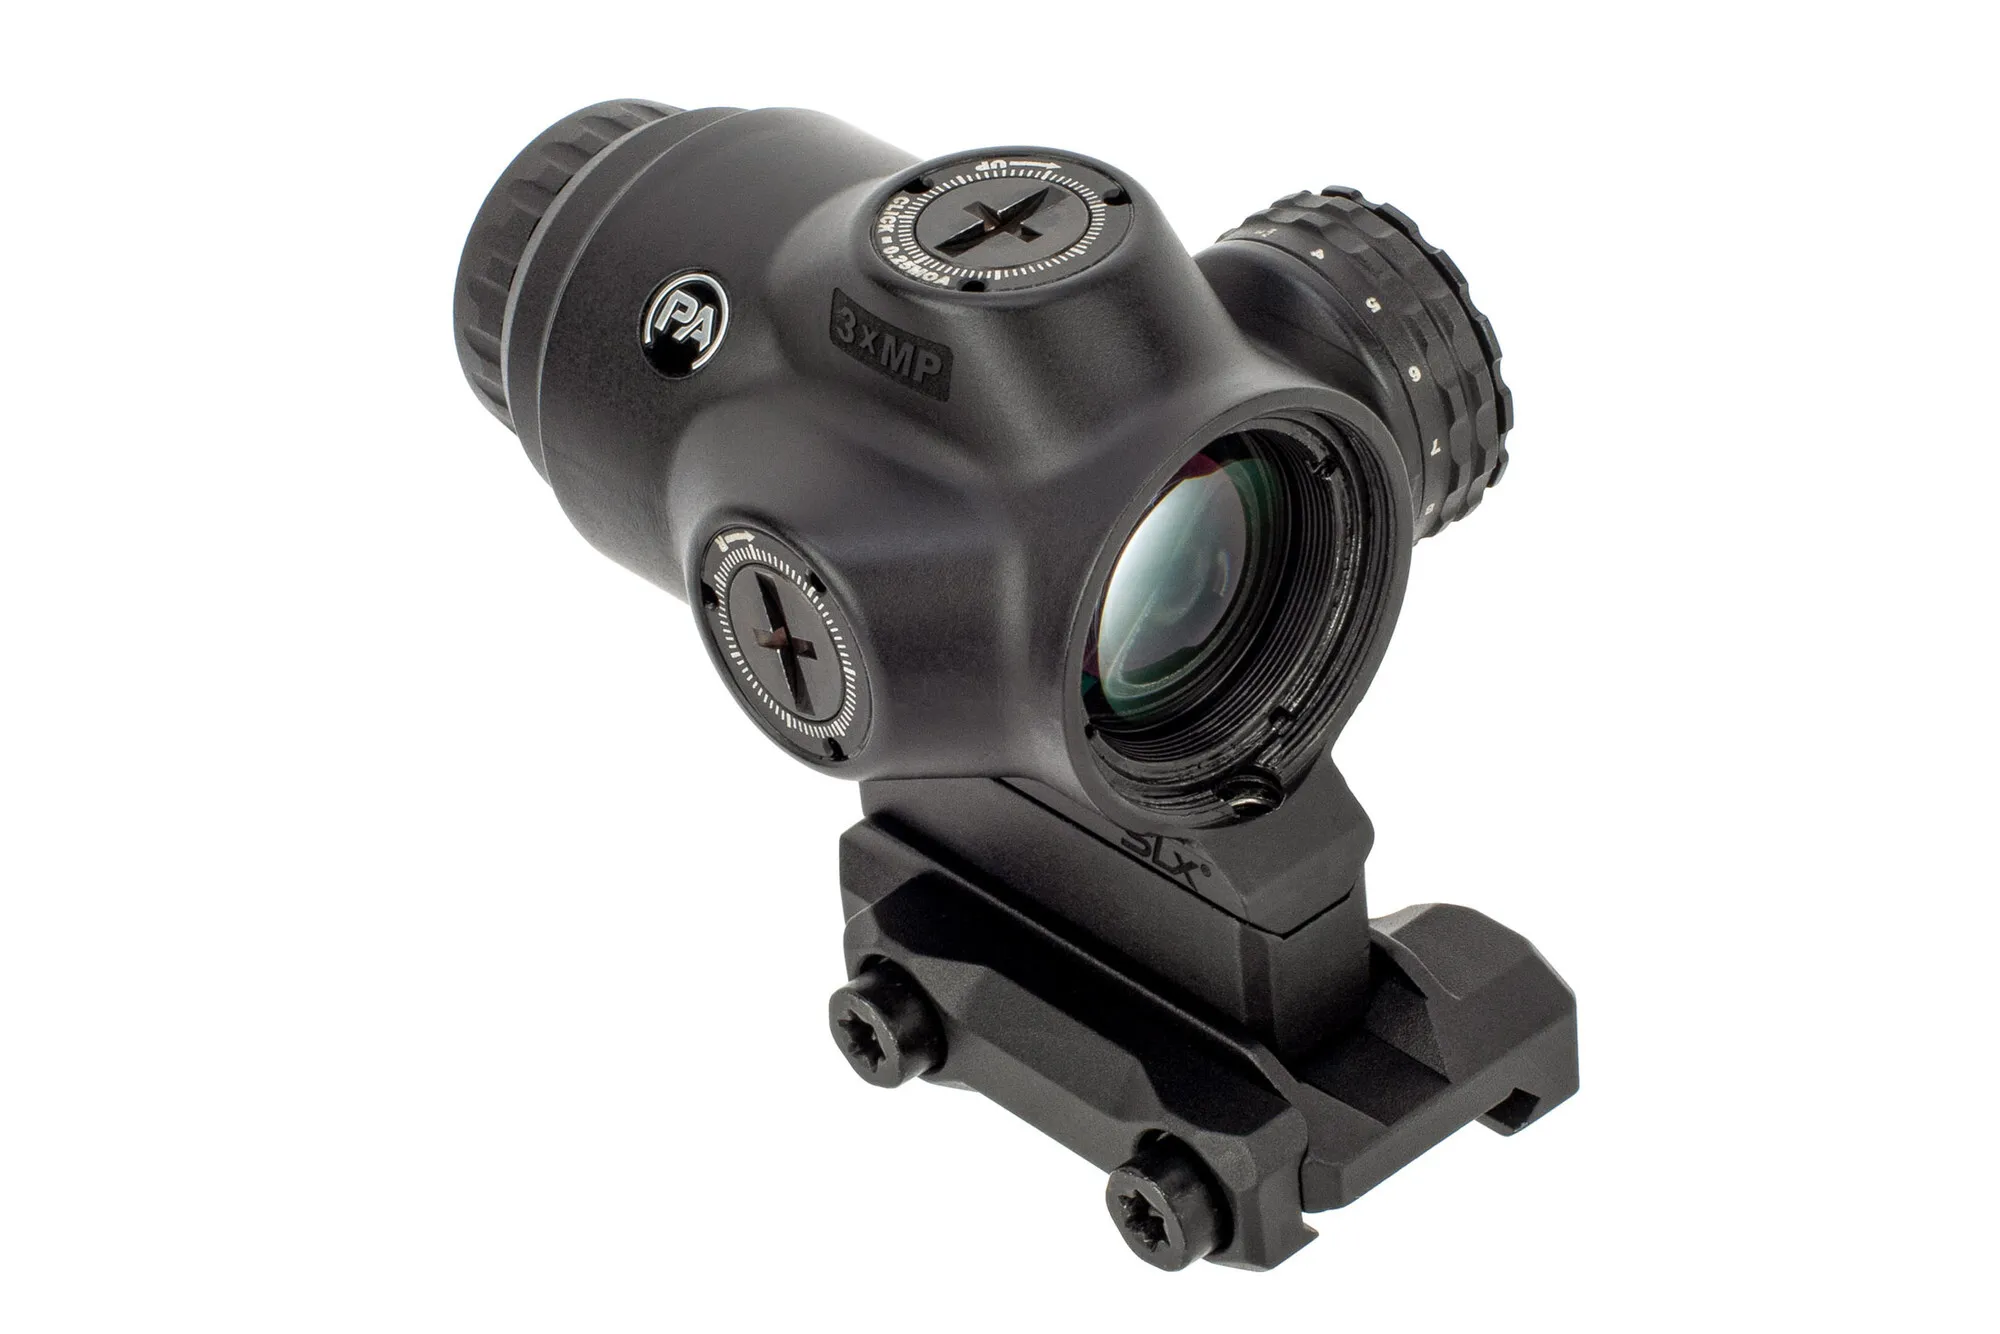 https://cityarsenal.com/product/primary-arms-slx-3x-microprism-optic-with-red-illuminated-acss-raptor-7-62-300bo-reticle-710040/